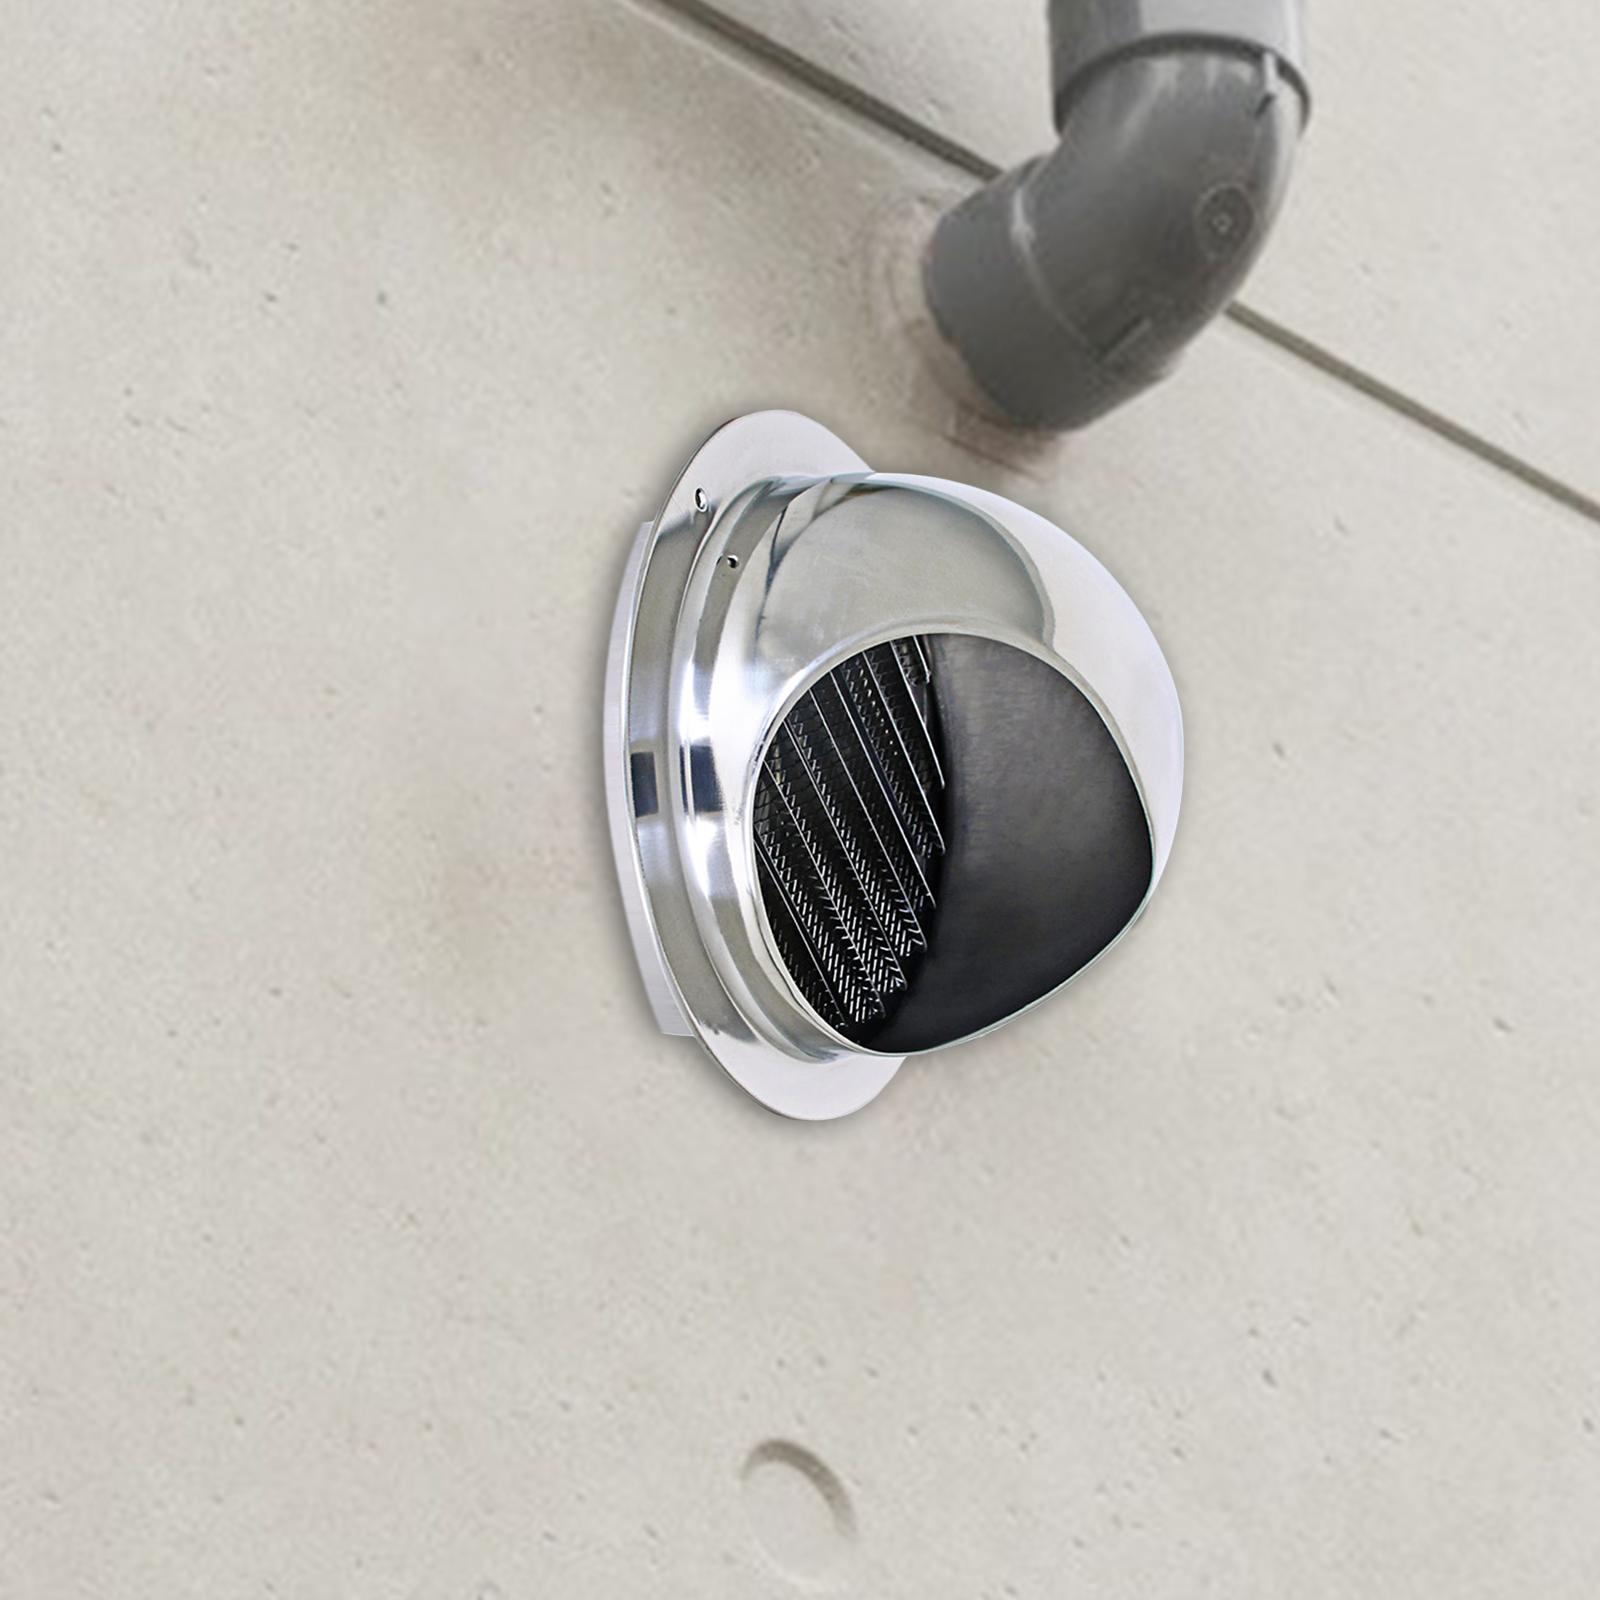 304 Stainless Steel Air Vent Outlet Caps with Built in Mesh Screen Vent Hood 130mm